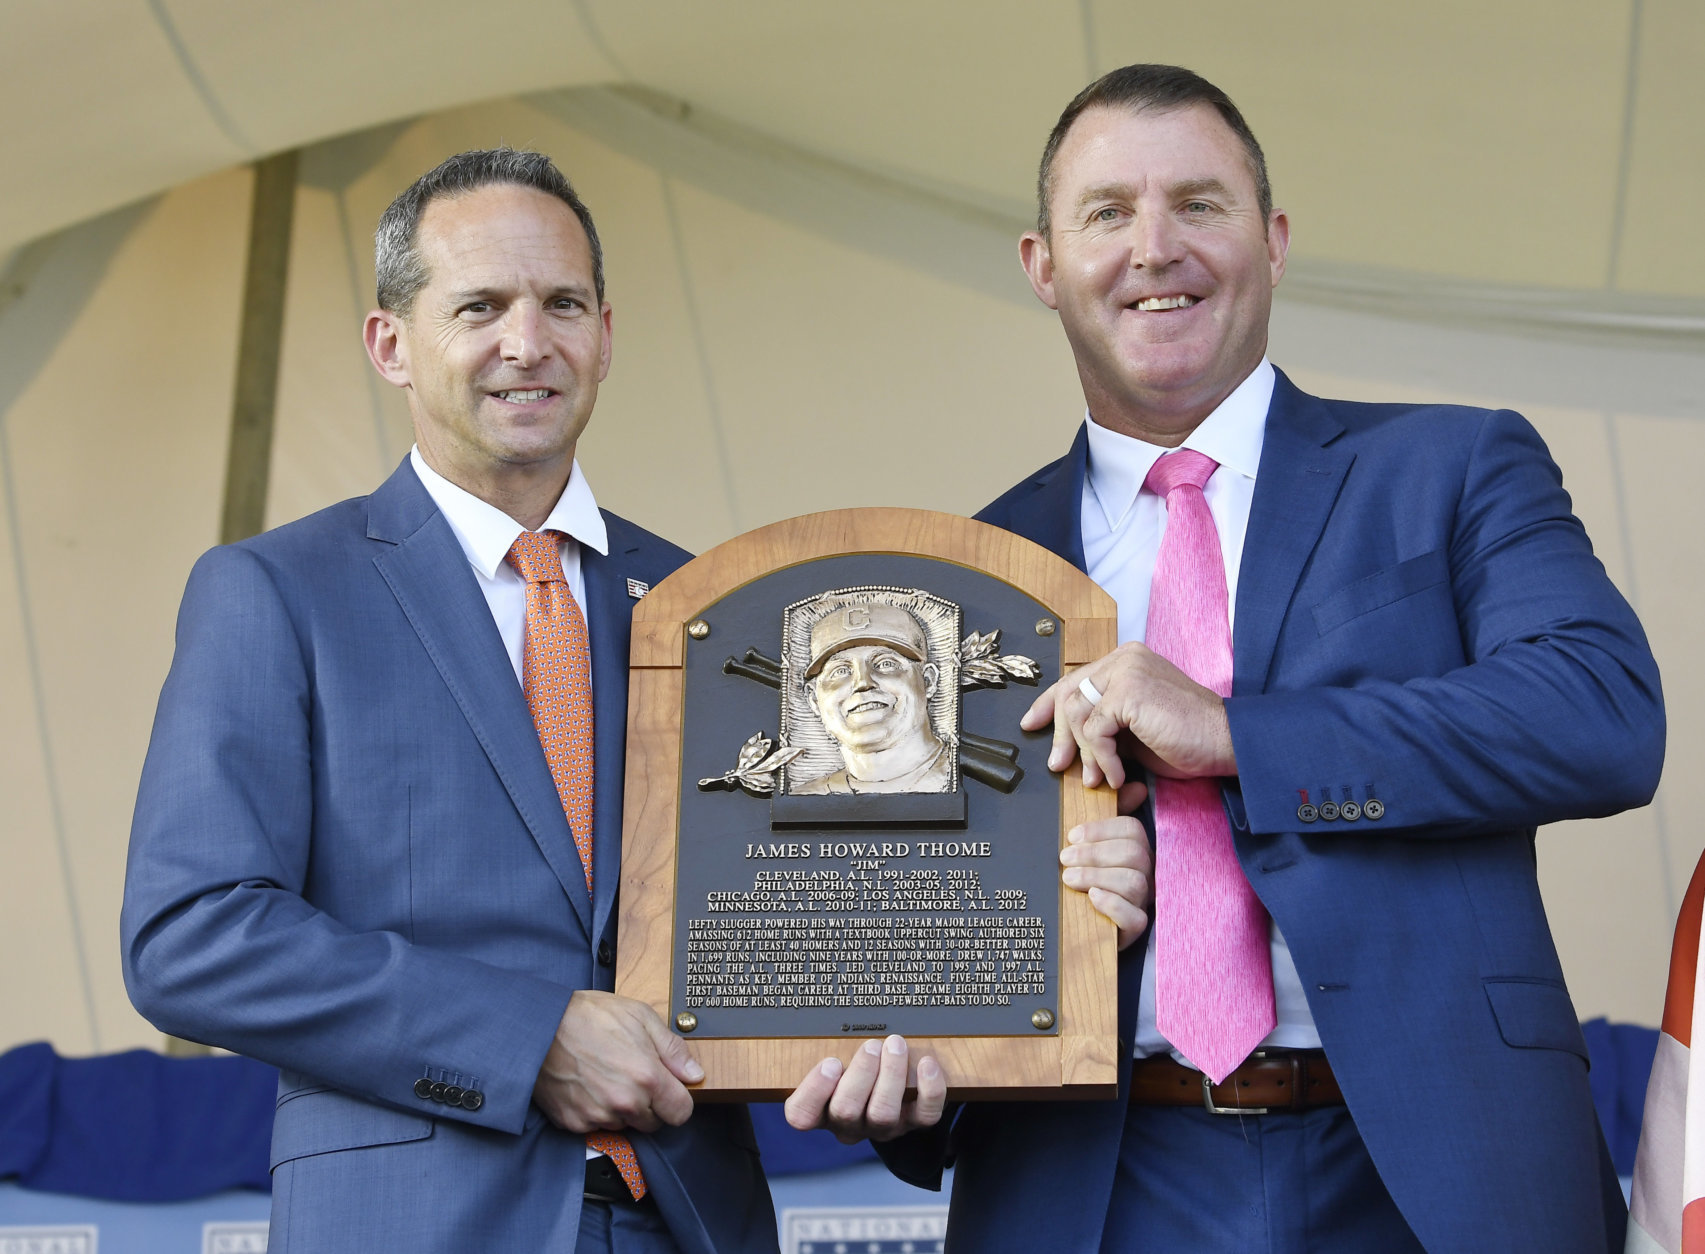 PHOTOS: 2018 MLB Hall of Fame induction ceremony - WTOP News